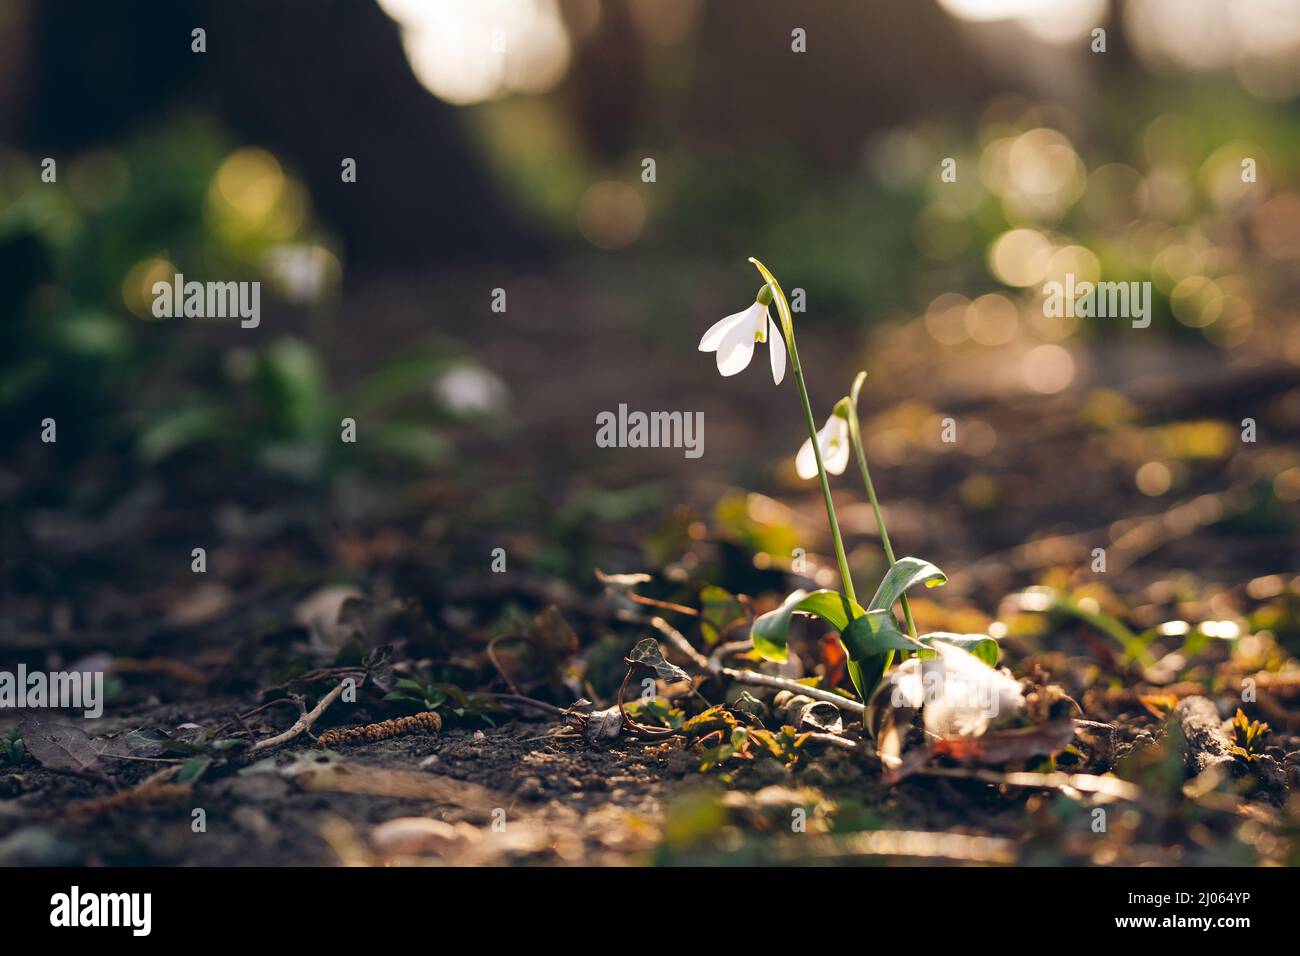 White snowdrop flower against sunset rays outdoors in spring. Gentle spring natural floral background Stock Photo